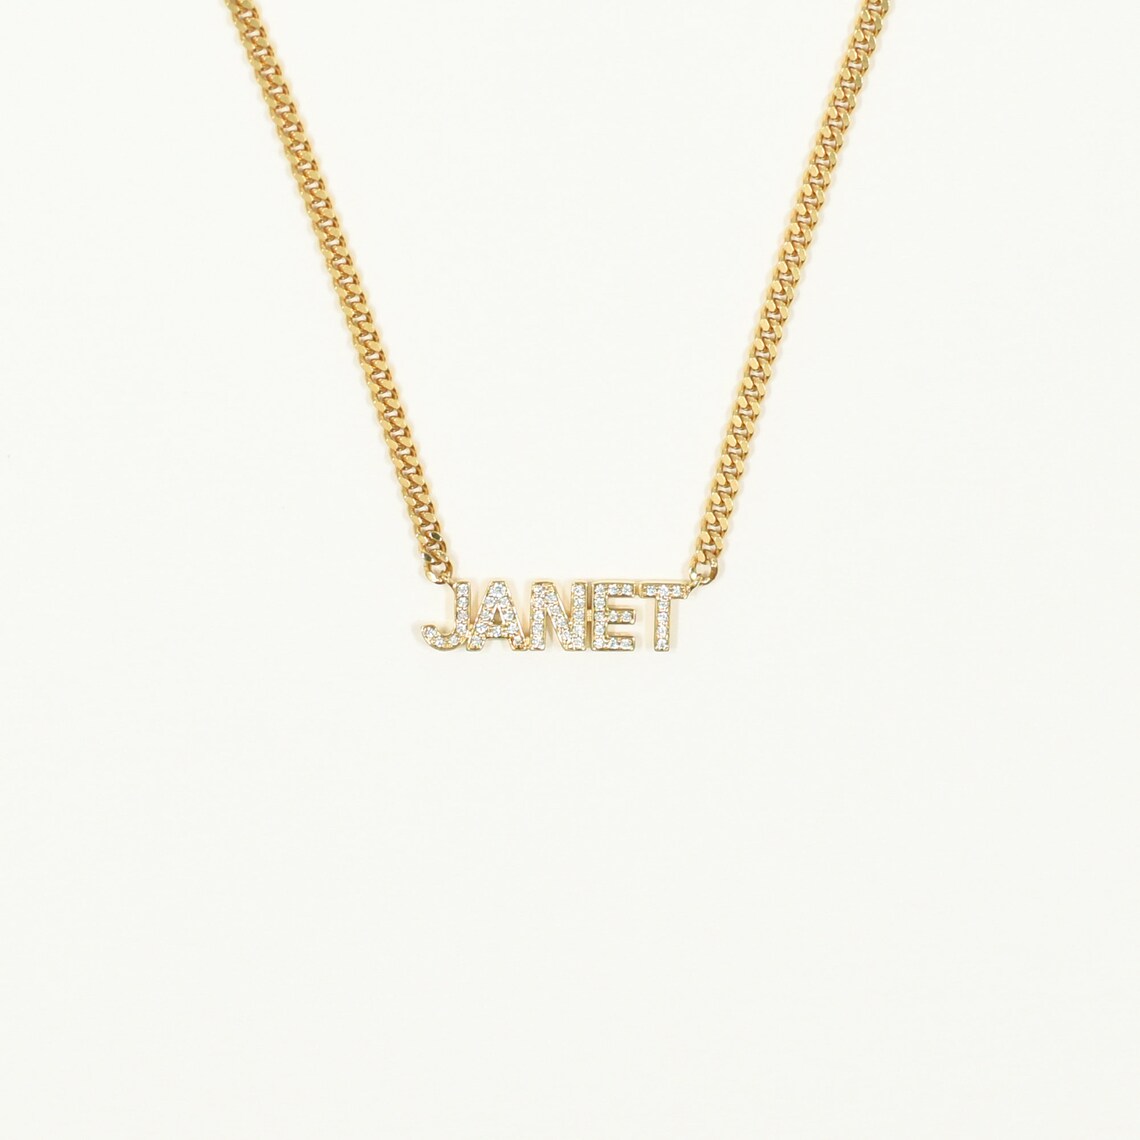 Custom Name Necklace With Cuban Chain